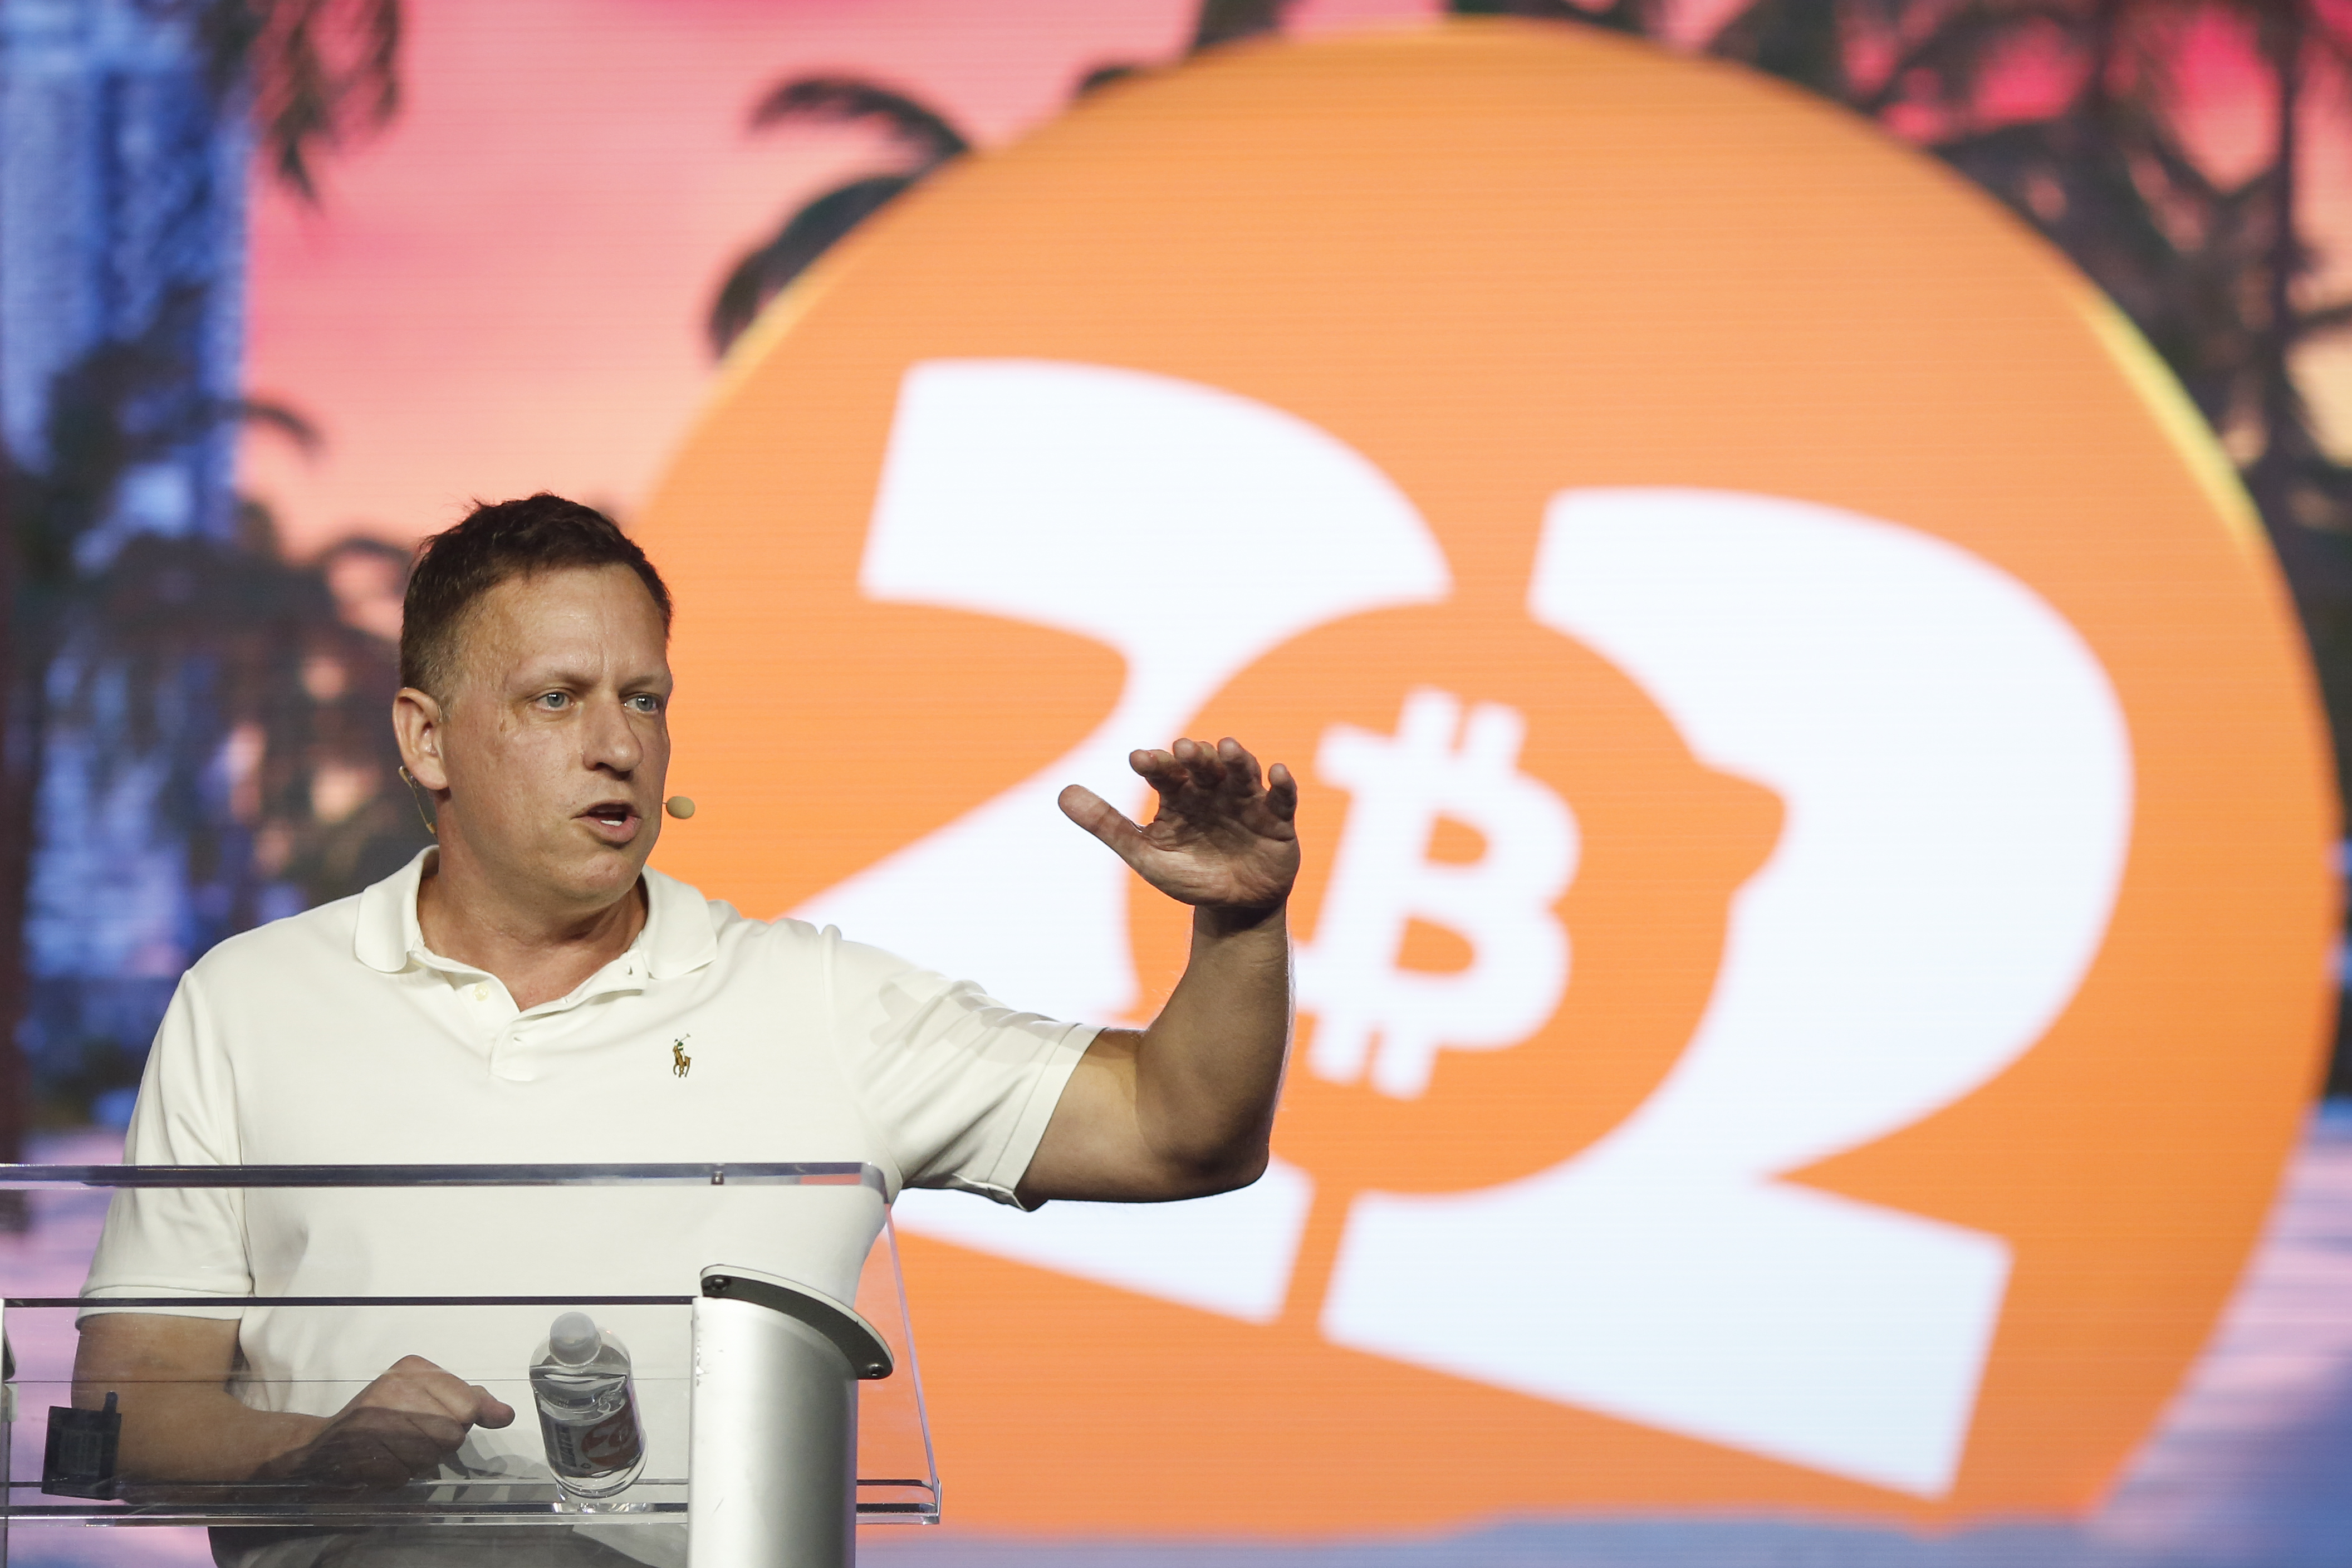 Peter Thiel calls Warren Buffett a 'sociopathic grandpa from Omaha,' taking aim at Bitcoin's 'enemies' Jamie Dimon and Larry Fink